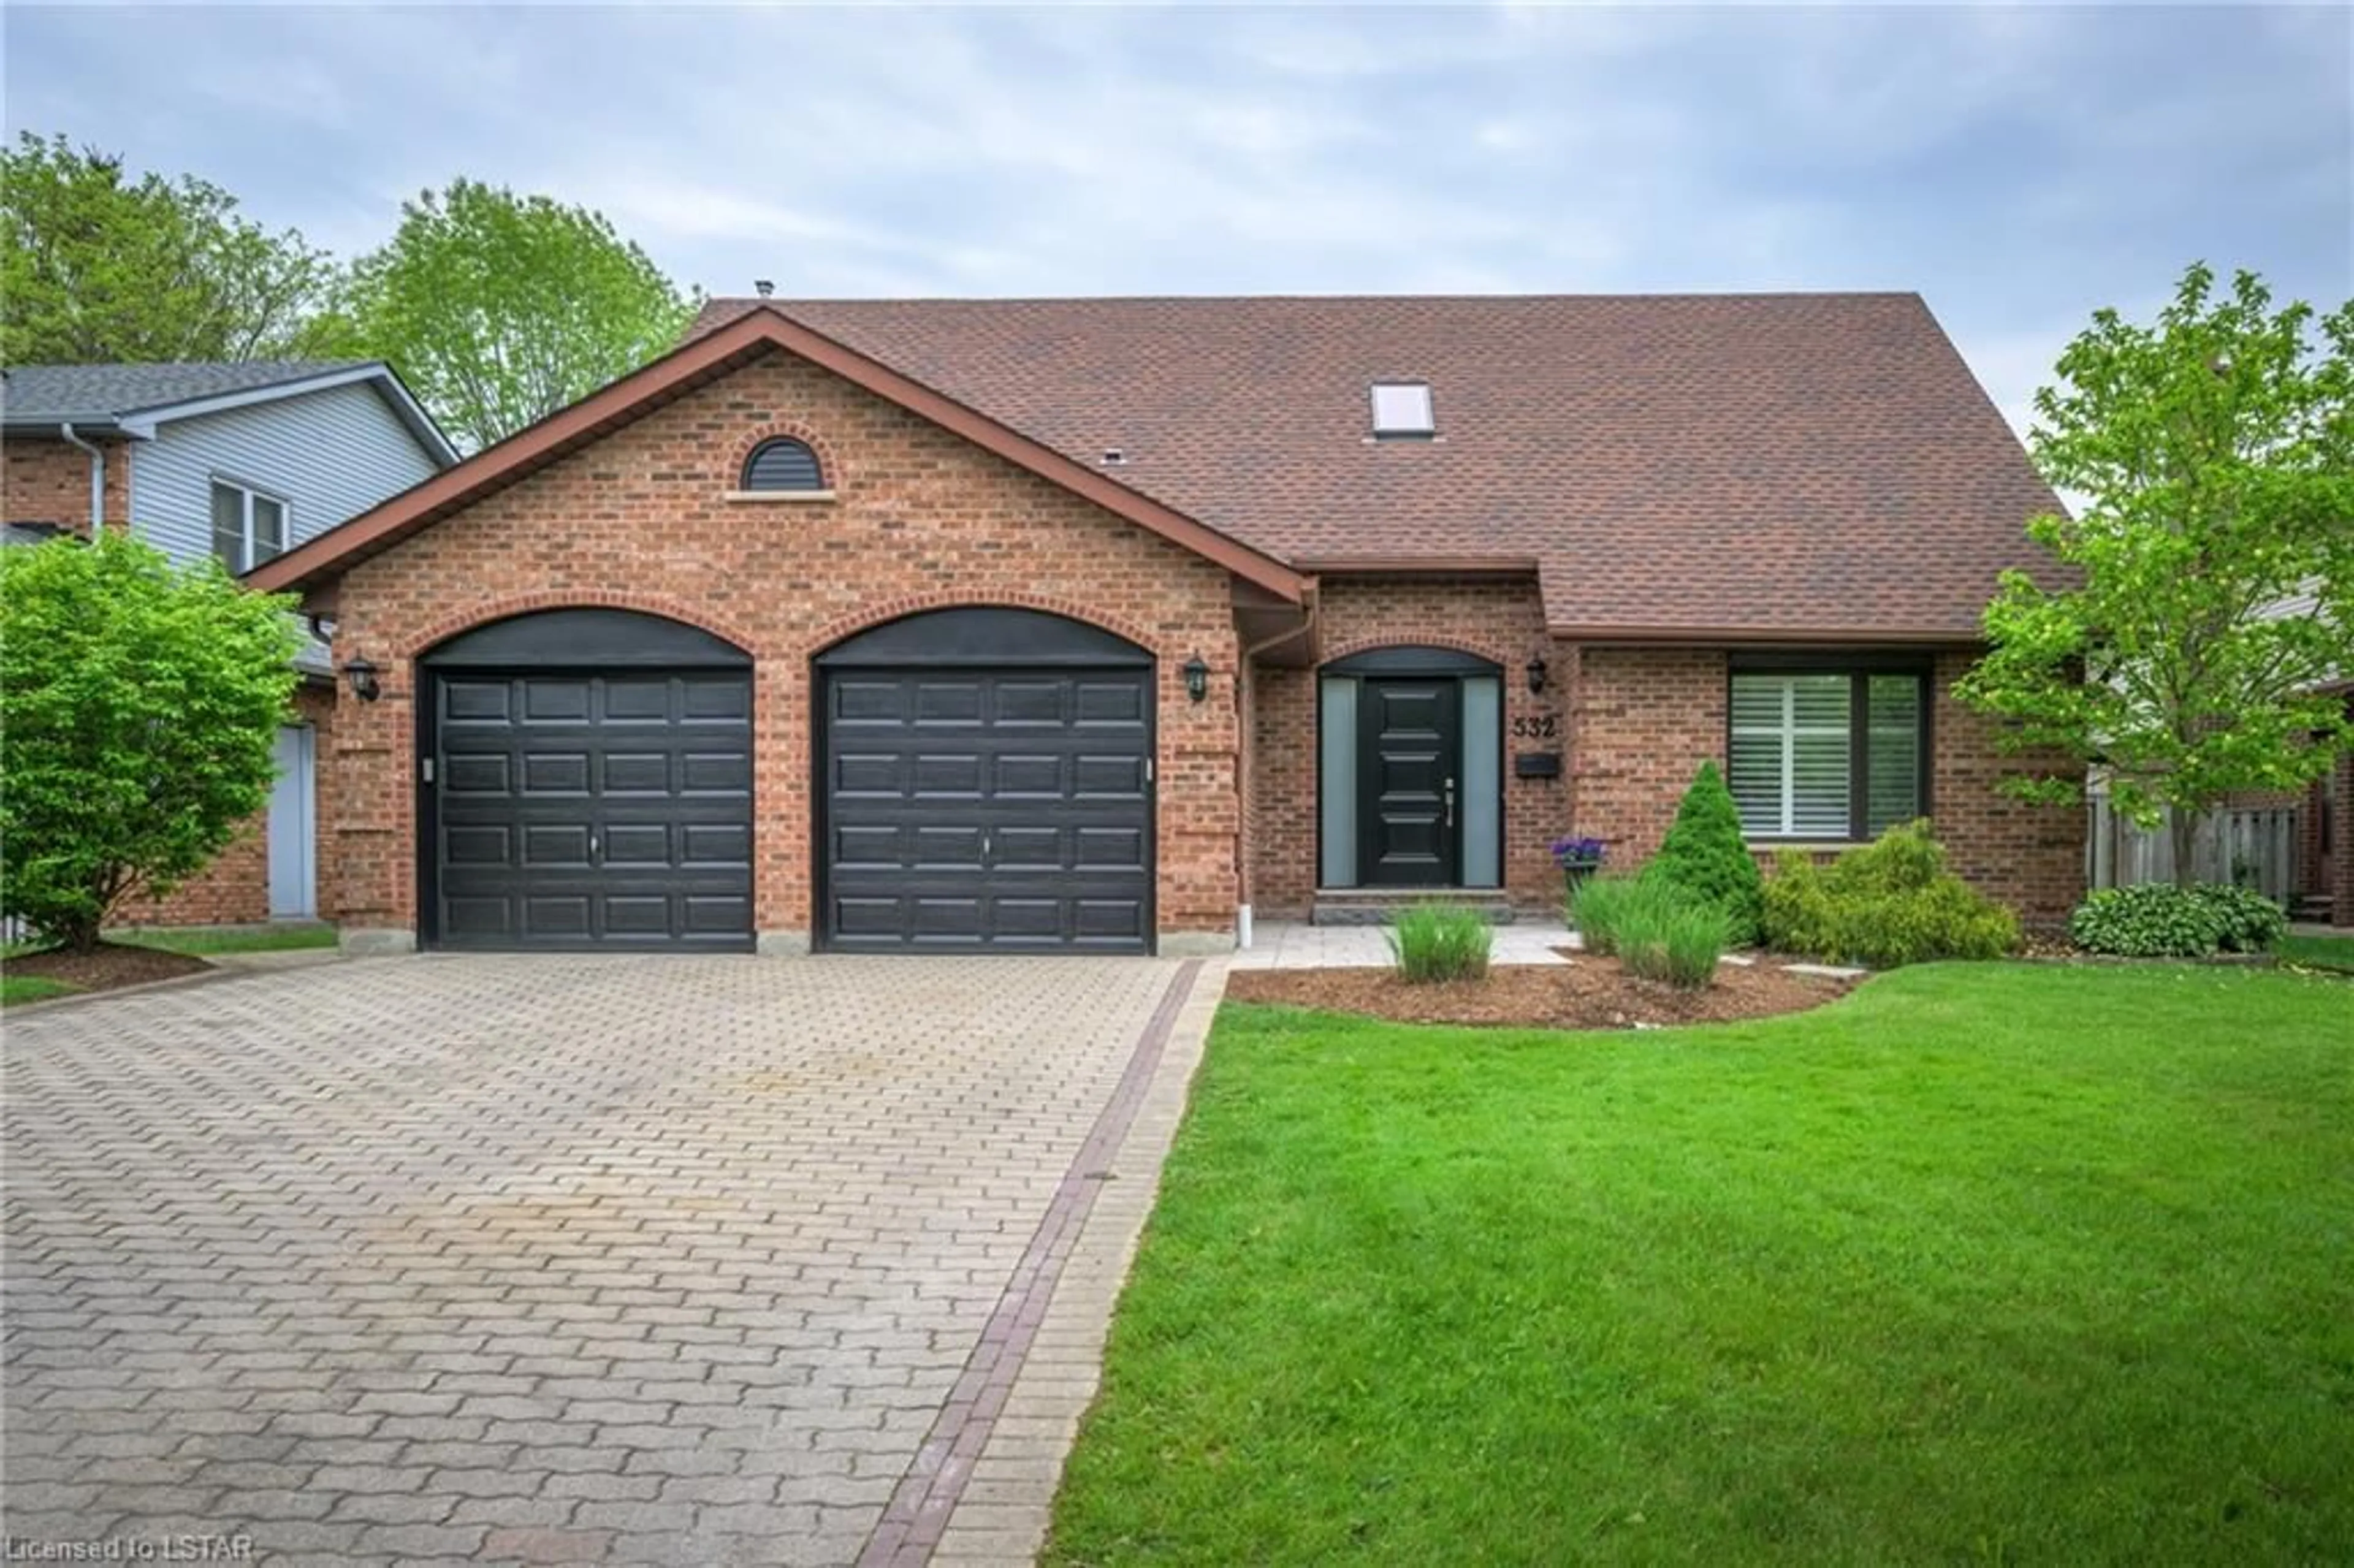 Home with brick exterior material for 532 Jeffreybrook Dr, London Ontario N5X 2S6